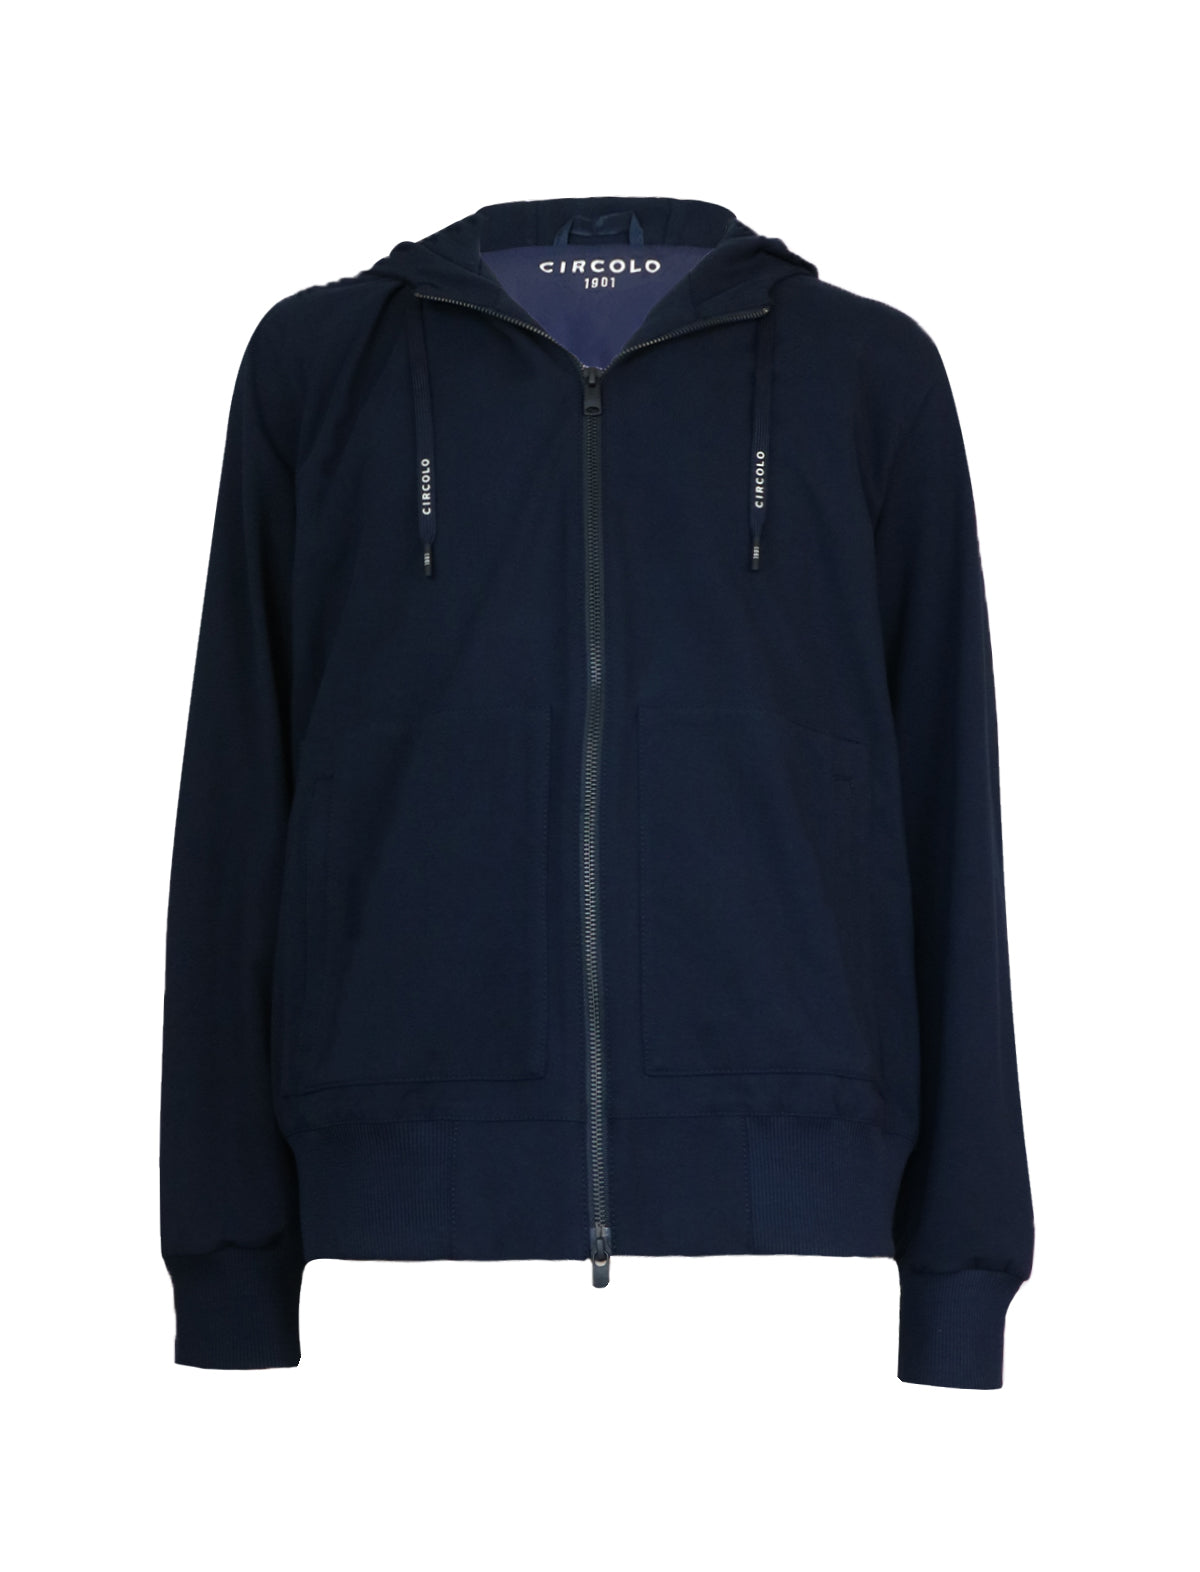 CIRCOLO 1901 Jersey Hoodie in Blue Navy